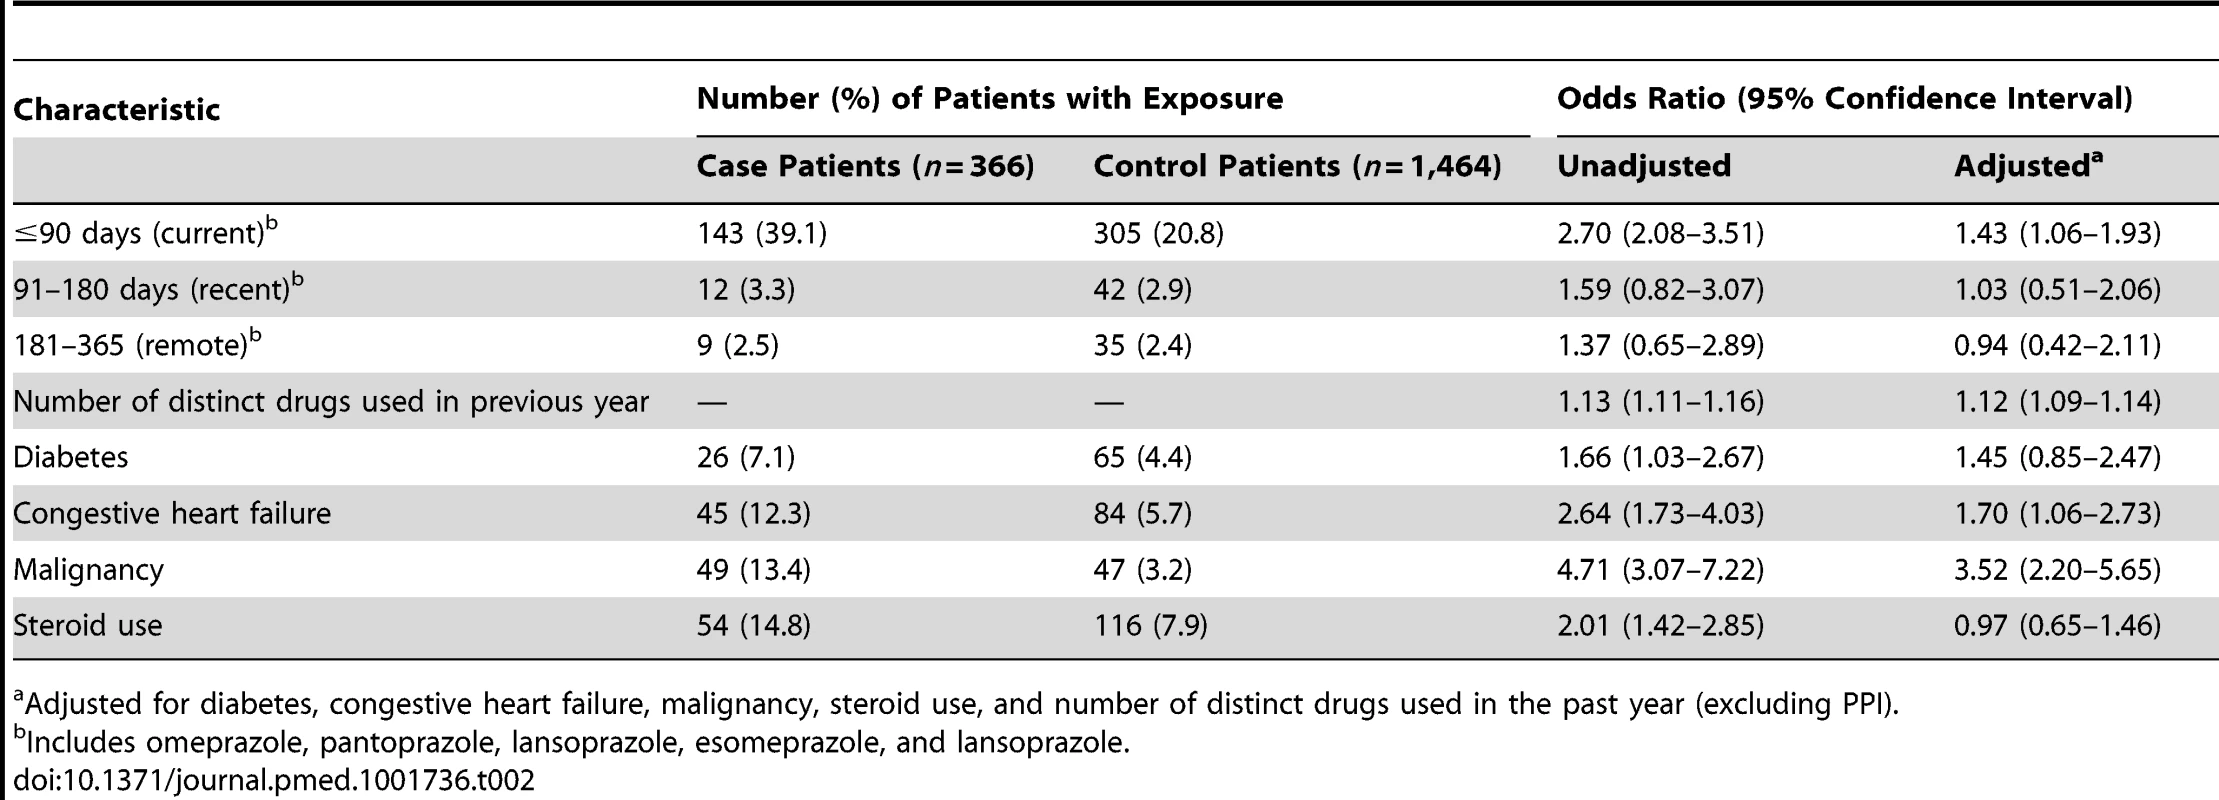 Proton pump inhibitor use and hospitalization with hypomagnesemia.